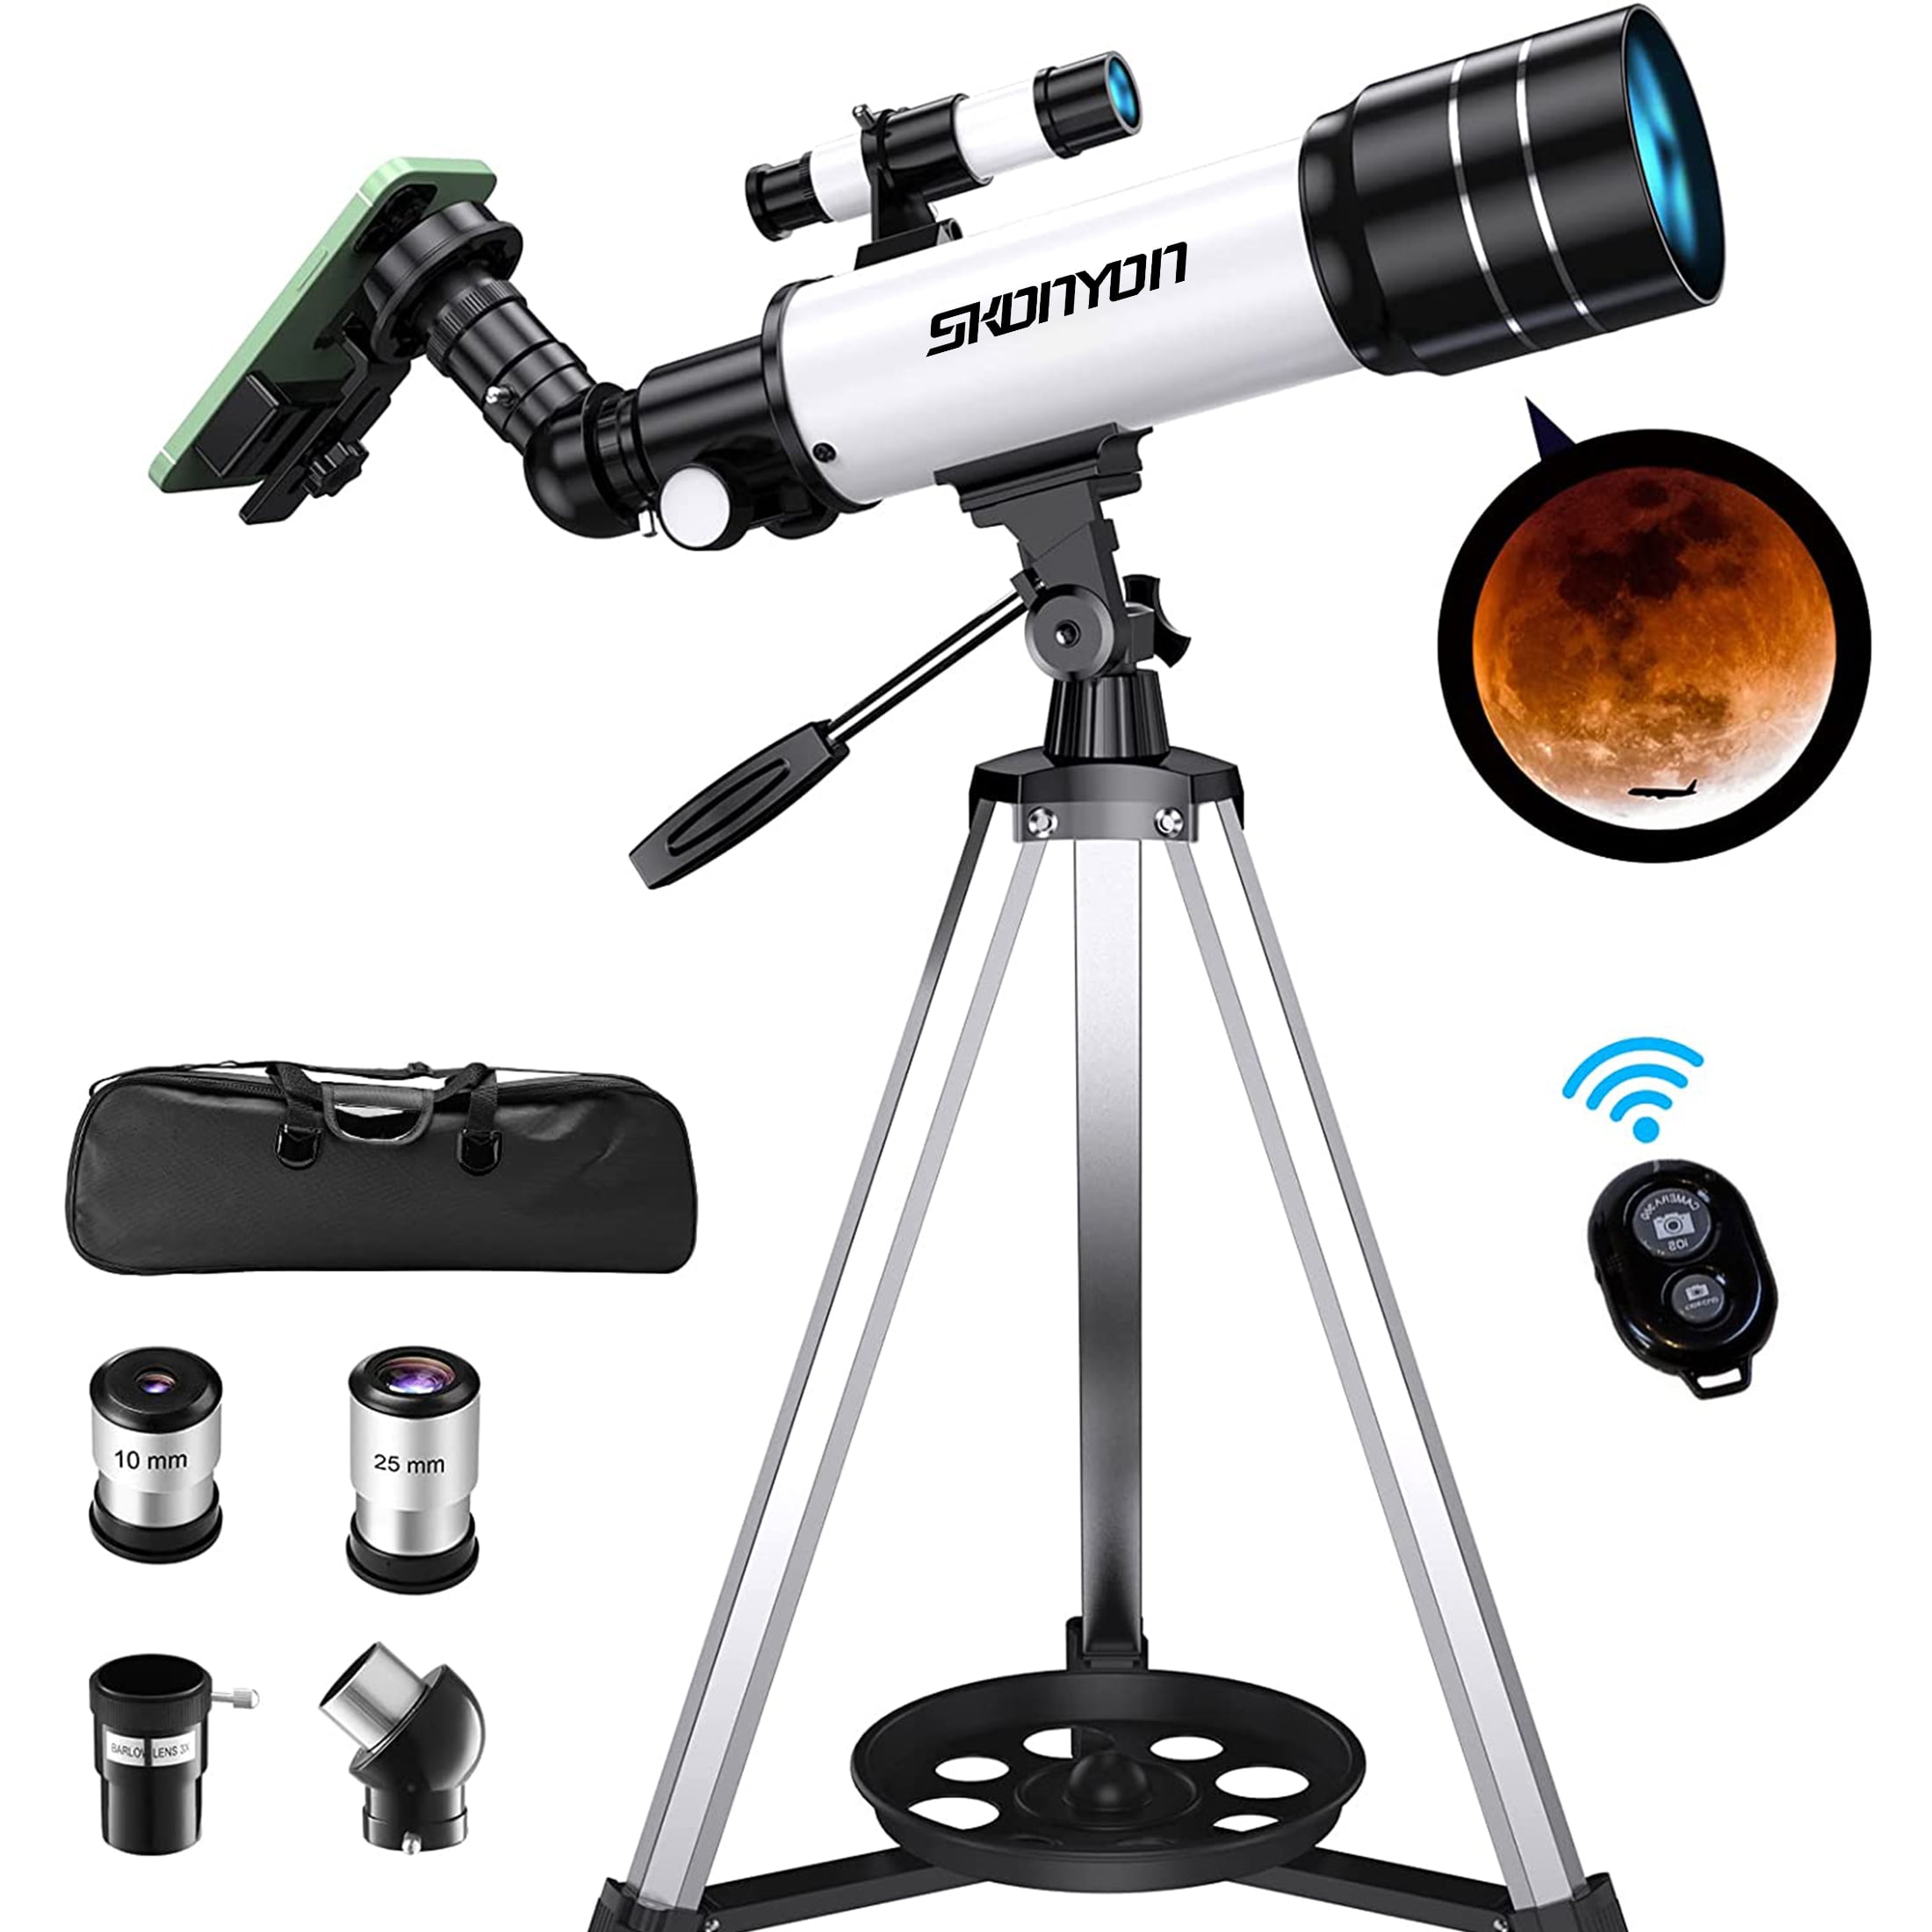 70mm Aperture Astronomy Refractor Telescope with Tripod for Adult Children-30070 JHLD Telescope 